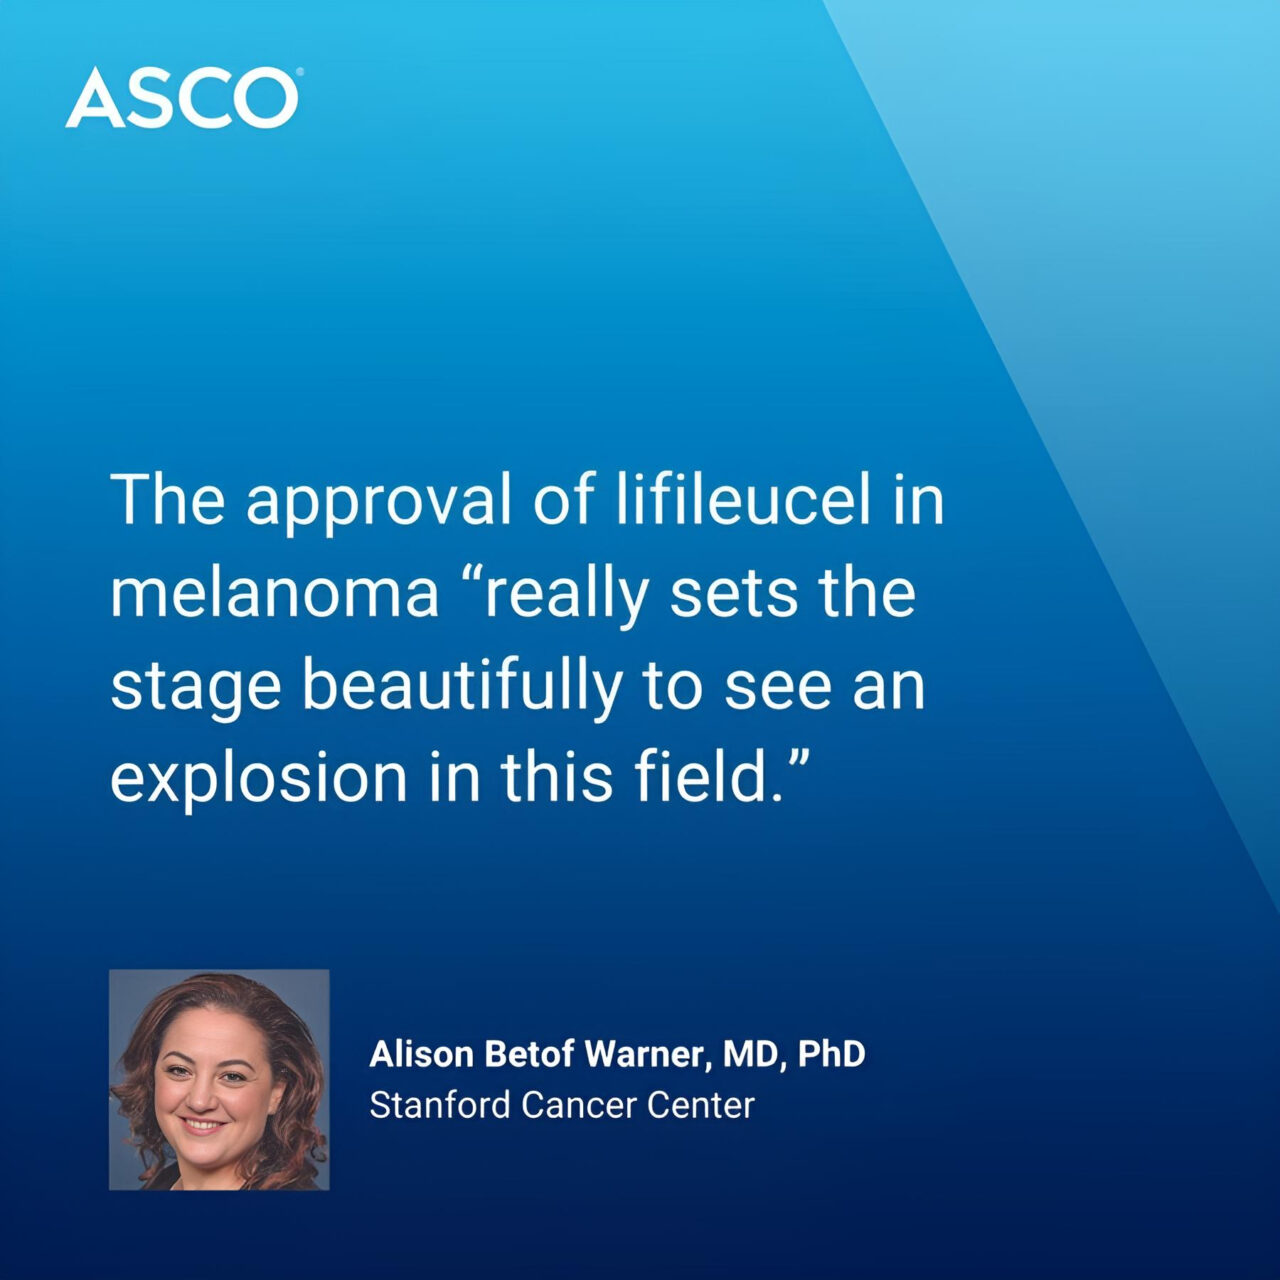 An ASCO 24 Educational Session will review accelerated approval of lifileucel in advanced melanoma